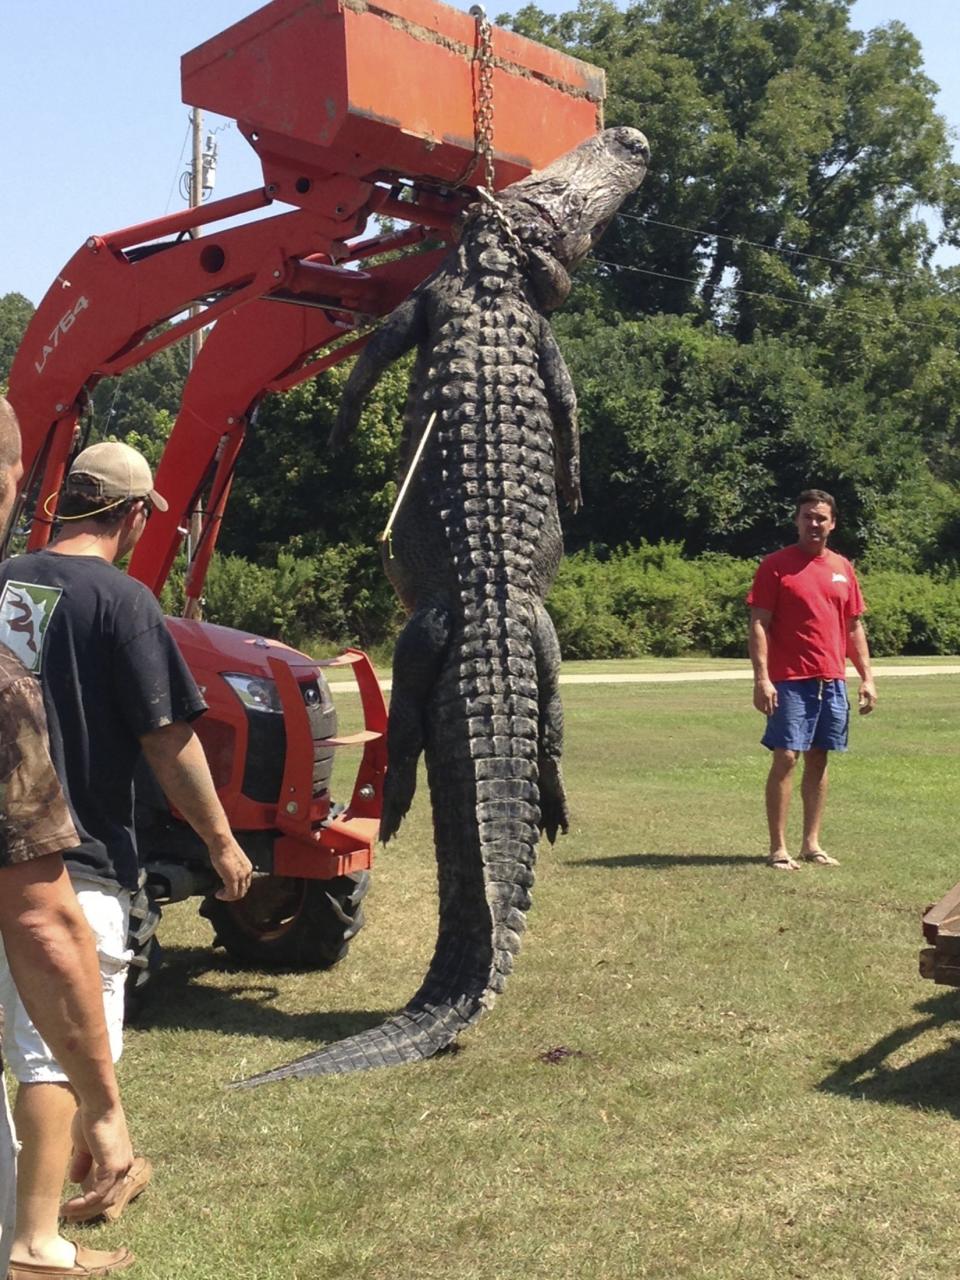 A skip loader is used to move a record-setting male alligator, weighing 727 pounds and measuring 13 feet, hunted in Vicksburg, Mississippi by Dustin Bockman